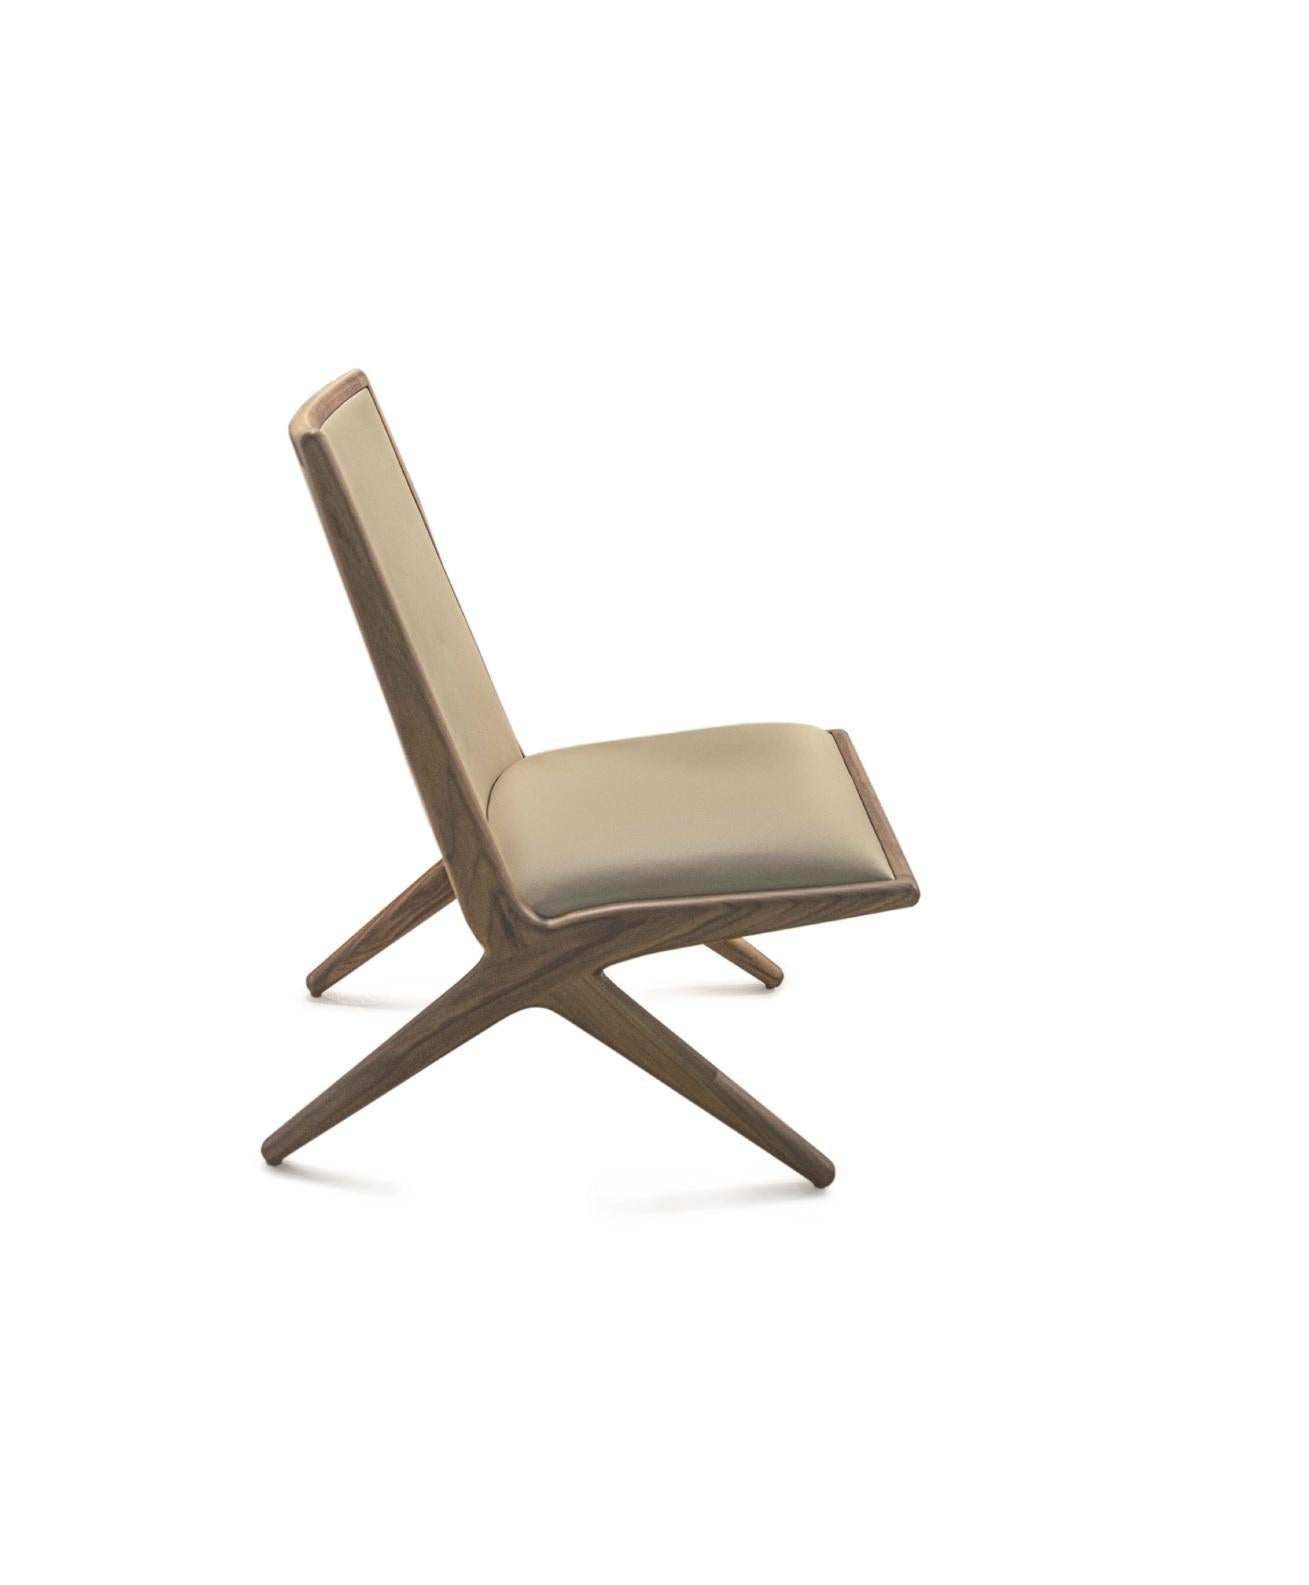 Oak structure Kaya lounge chair by LK Edition
Dimensions: 75.7 x 68 x H 86.3 cm
Materials: Oak. 
Only structure, no fabric. 
Also available in Walnut and upholstered with leather. 

It is with the sense of detail and requirement, this research of